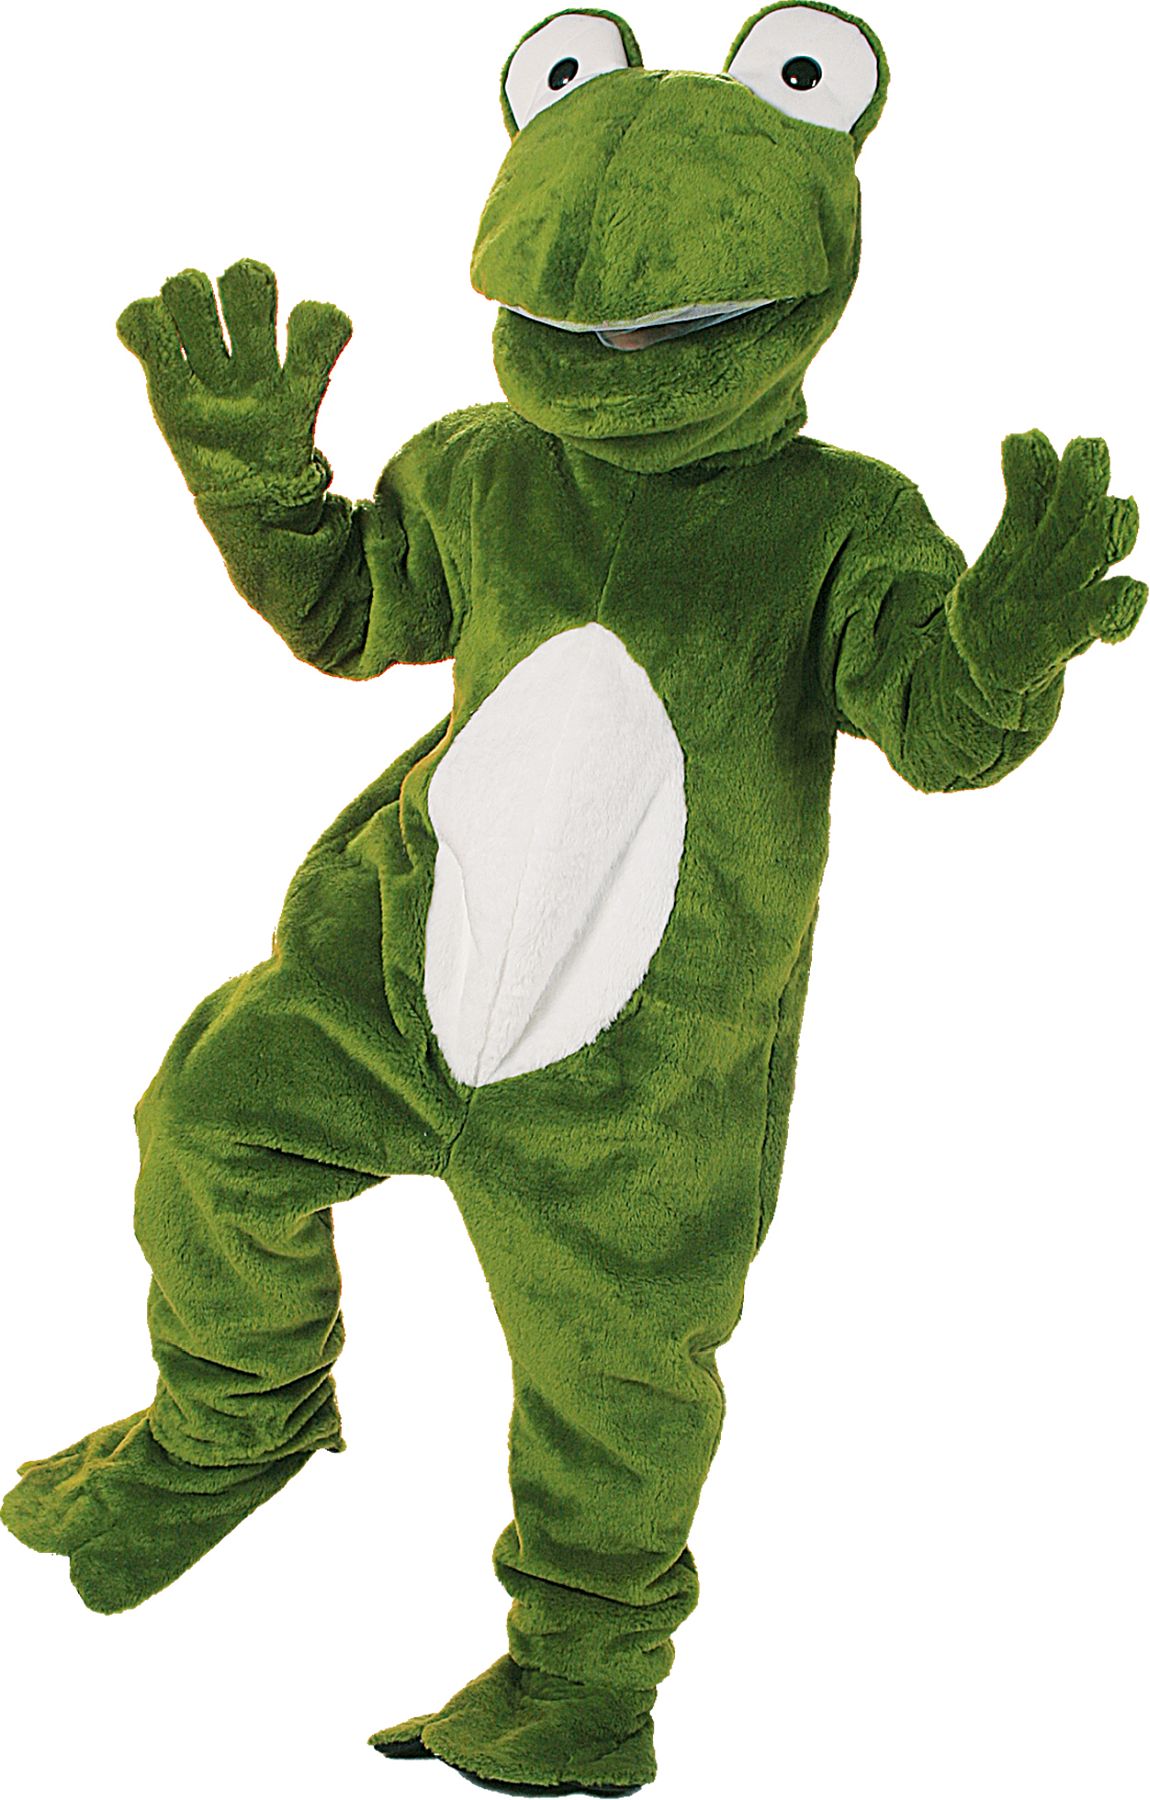 Big frog overall with head